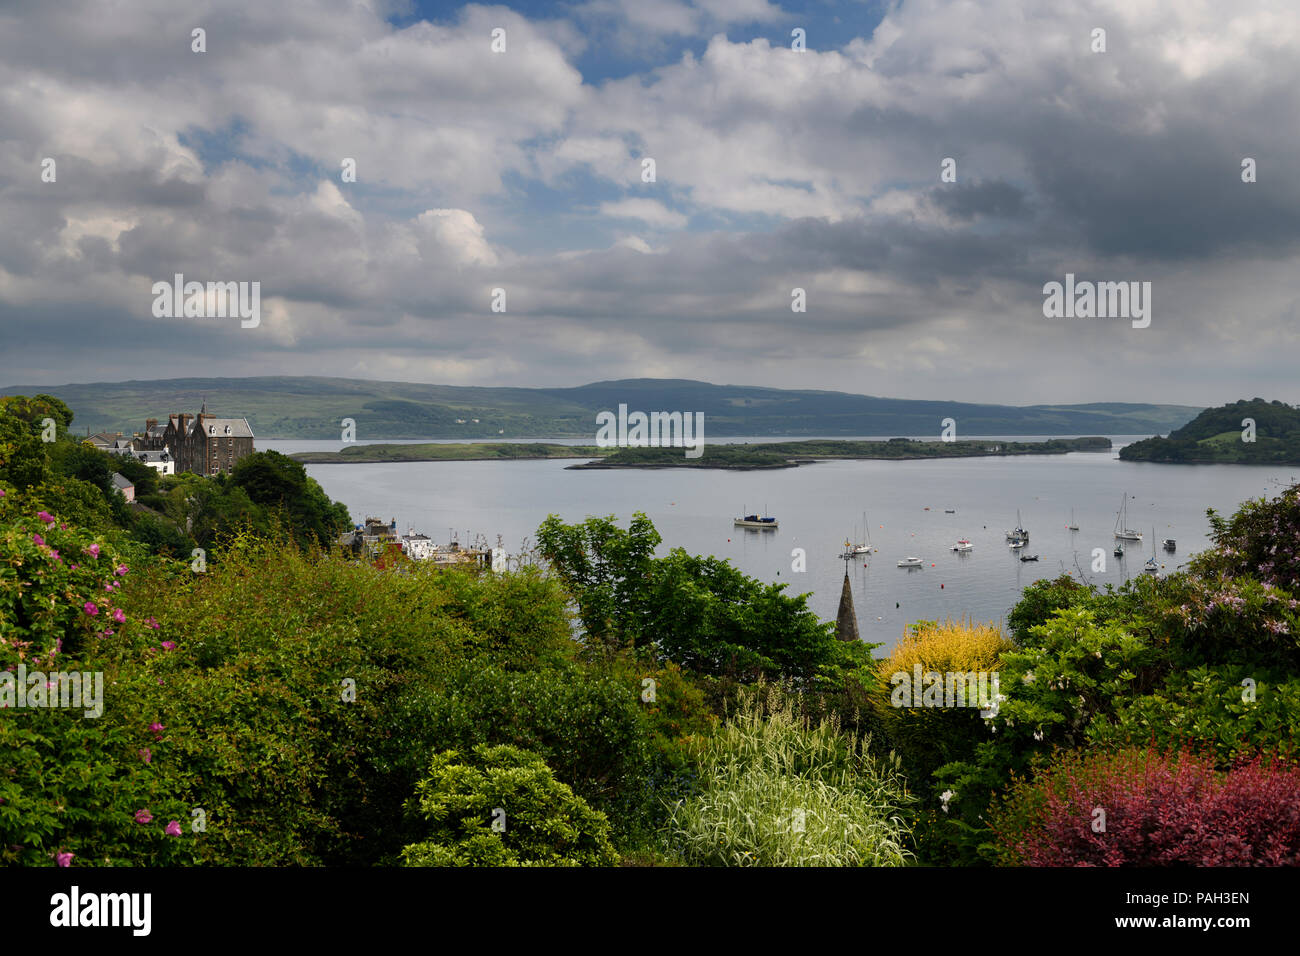 Hilltop garden view of Tobermory harbour Isle of Mull with Calve Island in the Sound of Mull Scotland UK Stock Photo